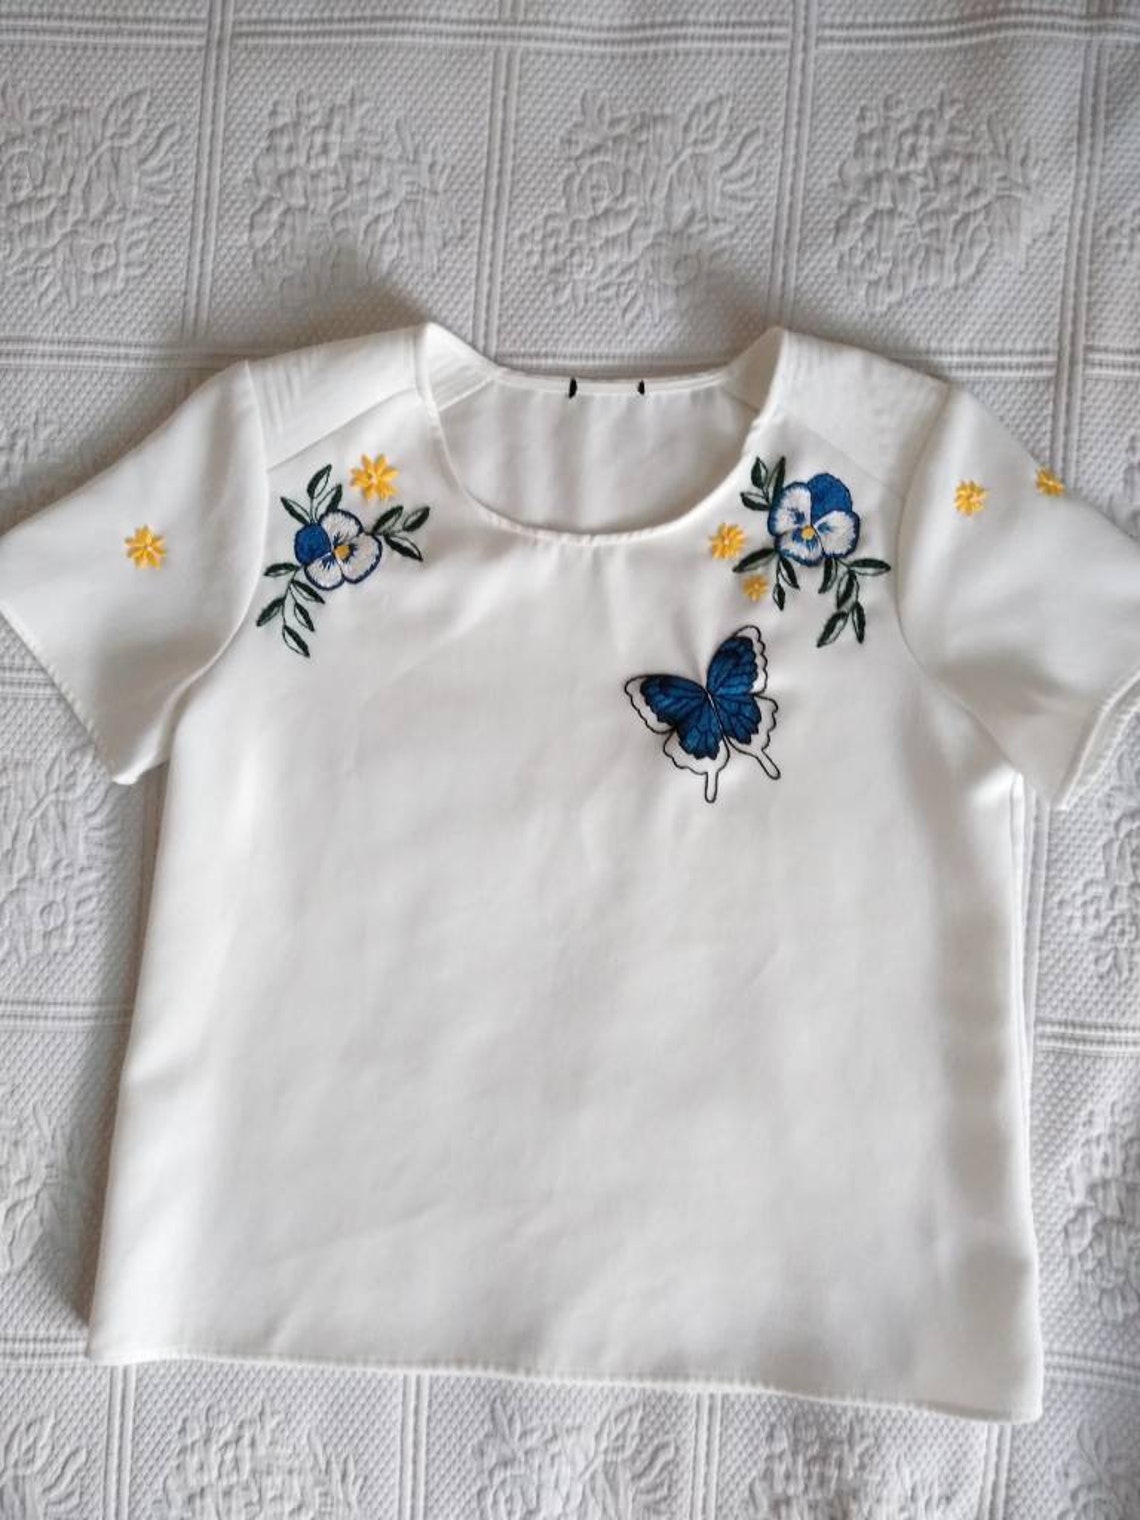 Embroidered Butterfly Shirt, White, Blue, Butterfly, Short Sleeve ...